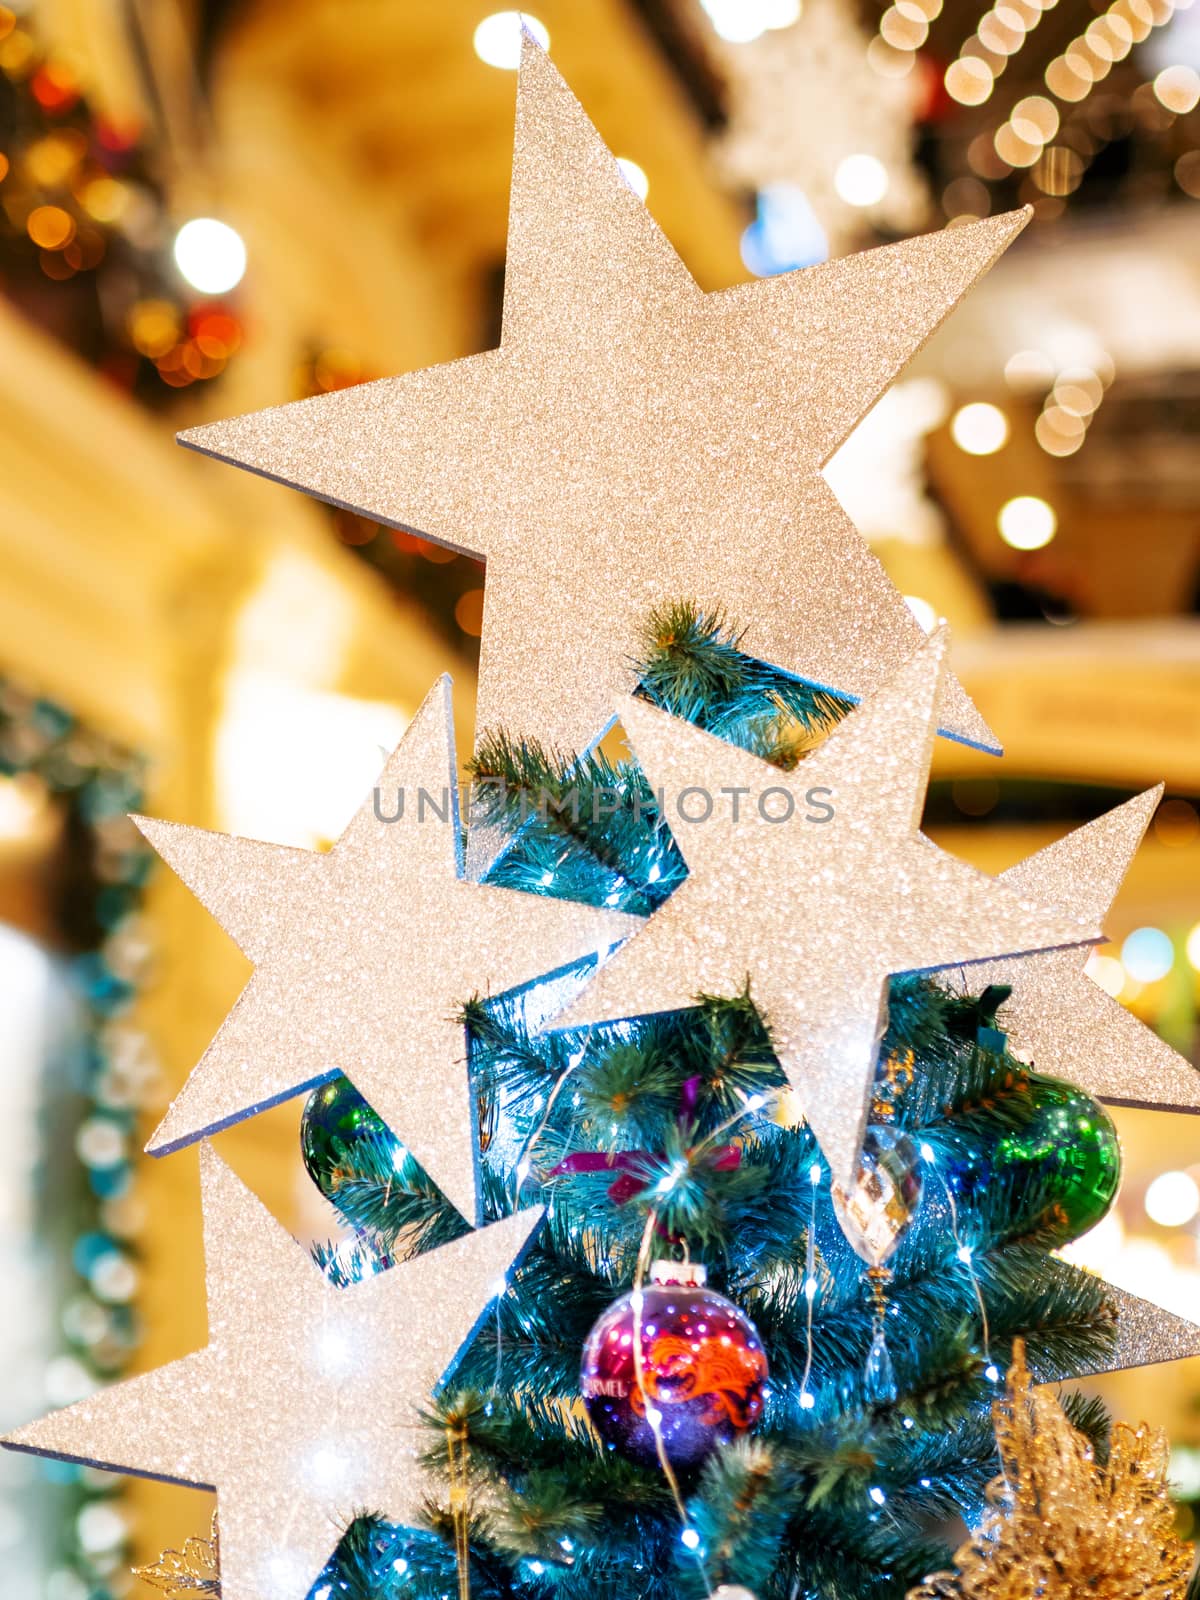 Silver shining stars, made of spangles. New Year decoration for Christmas tree top.